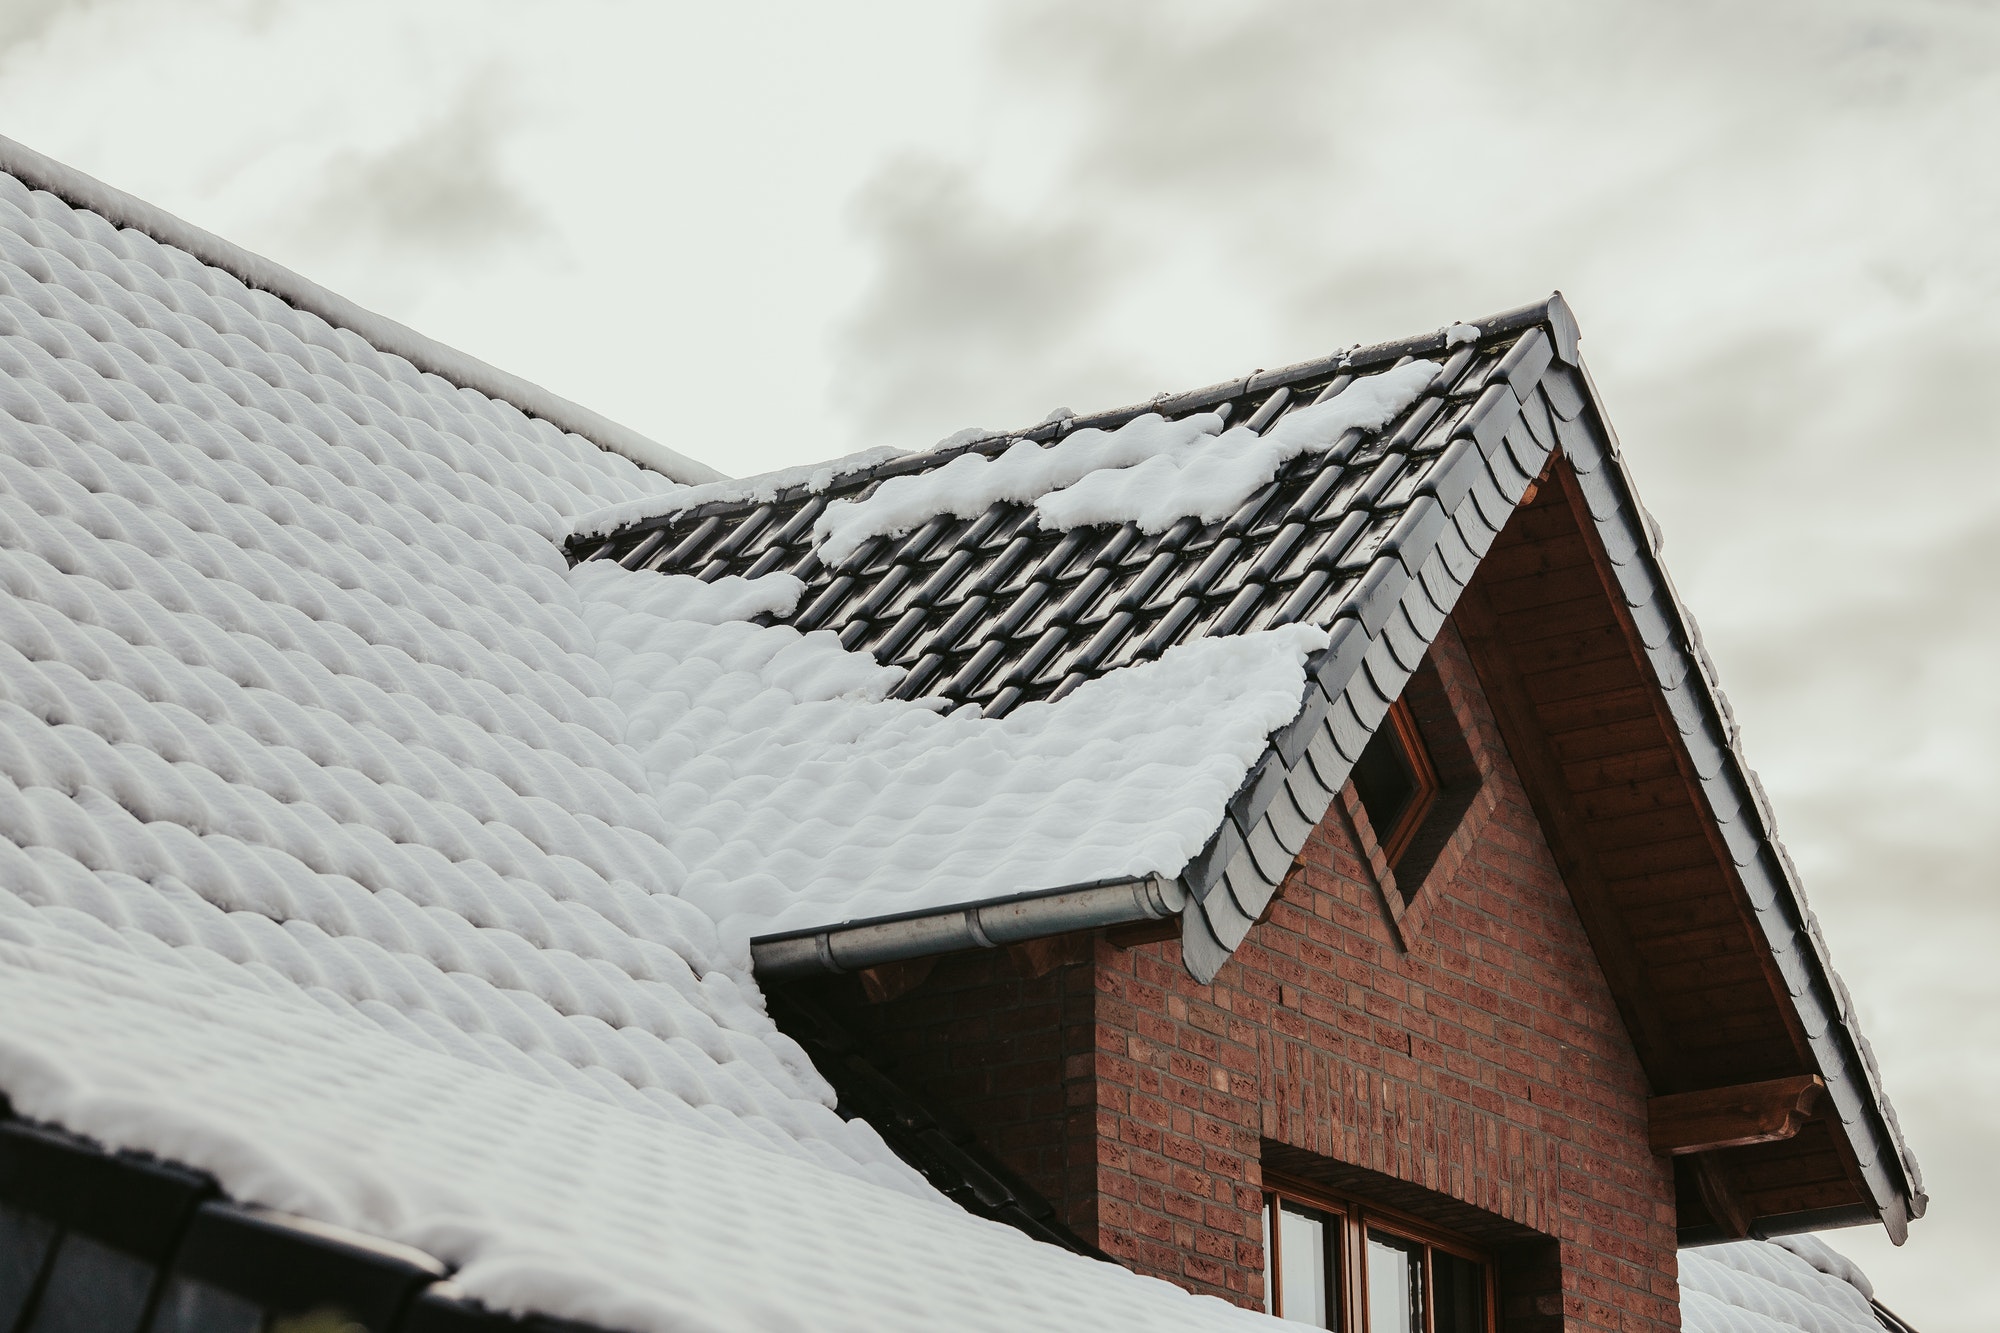 Low angle shot of a roof of a brick building covered in the snow under a cloudy sky